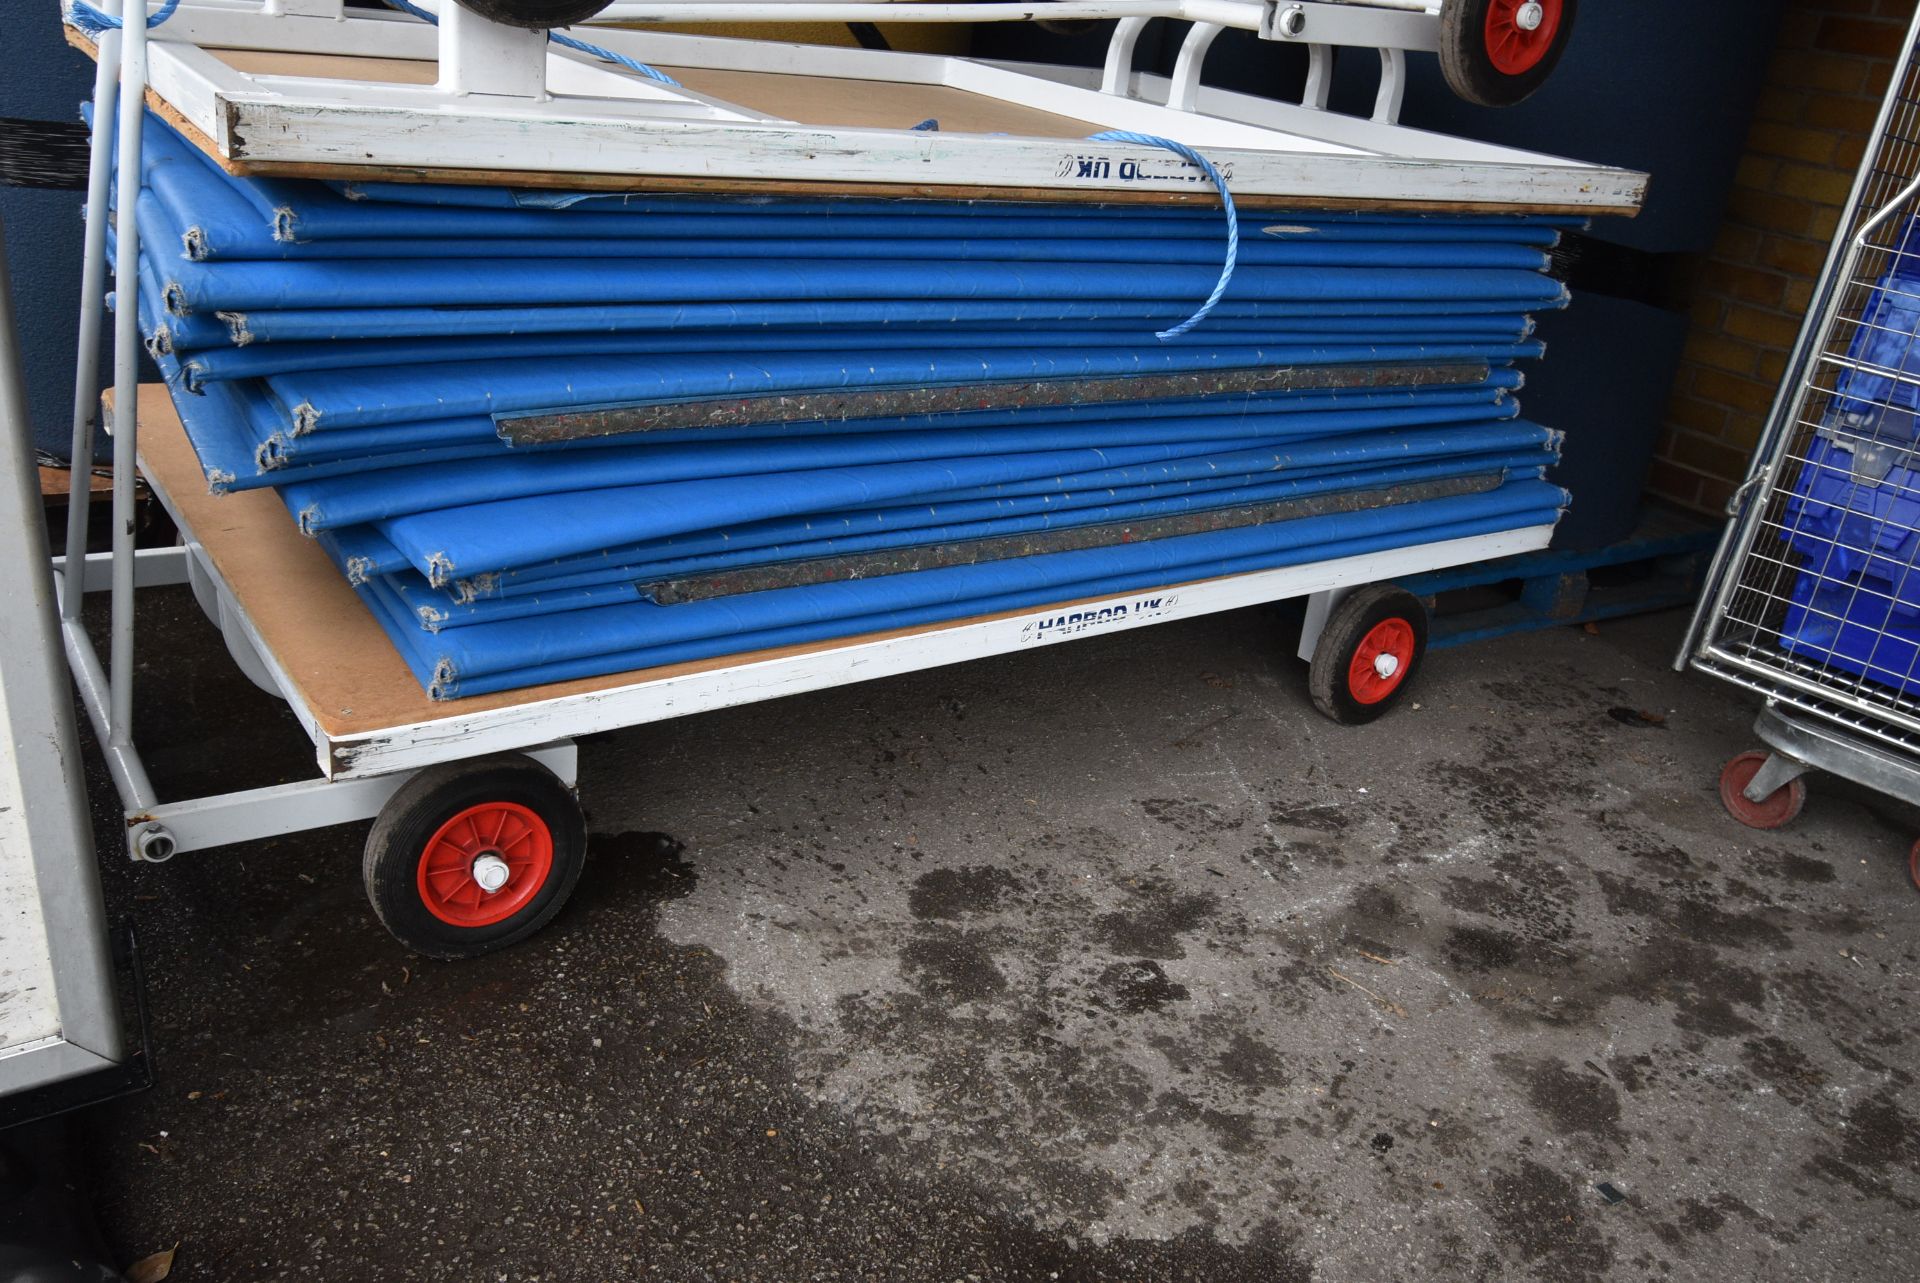 *White Trolley 200x120cm with Ten Blue Mats